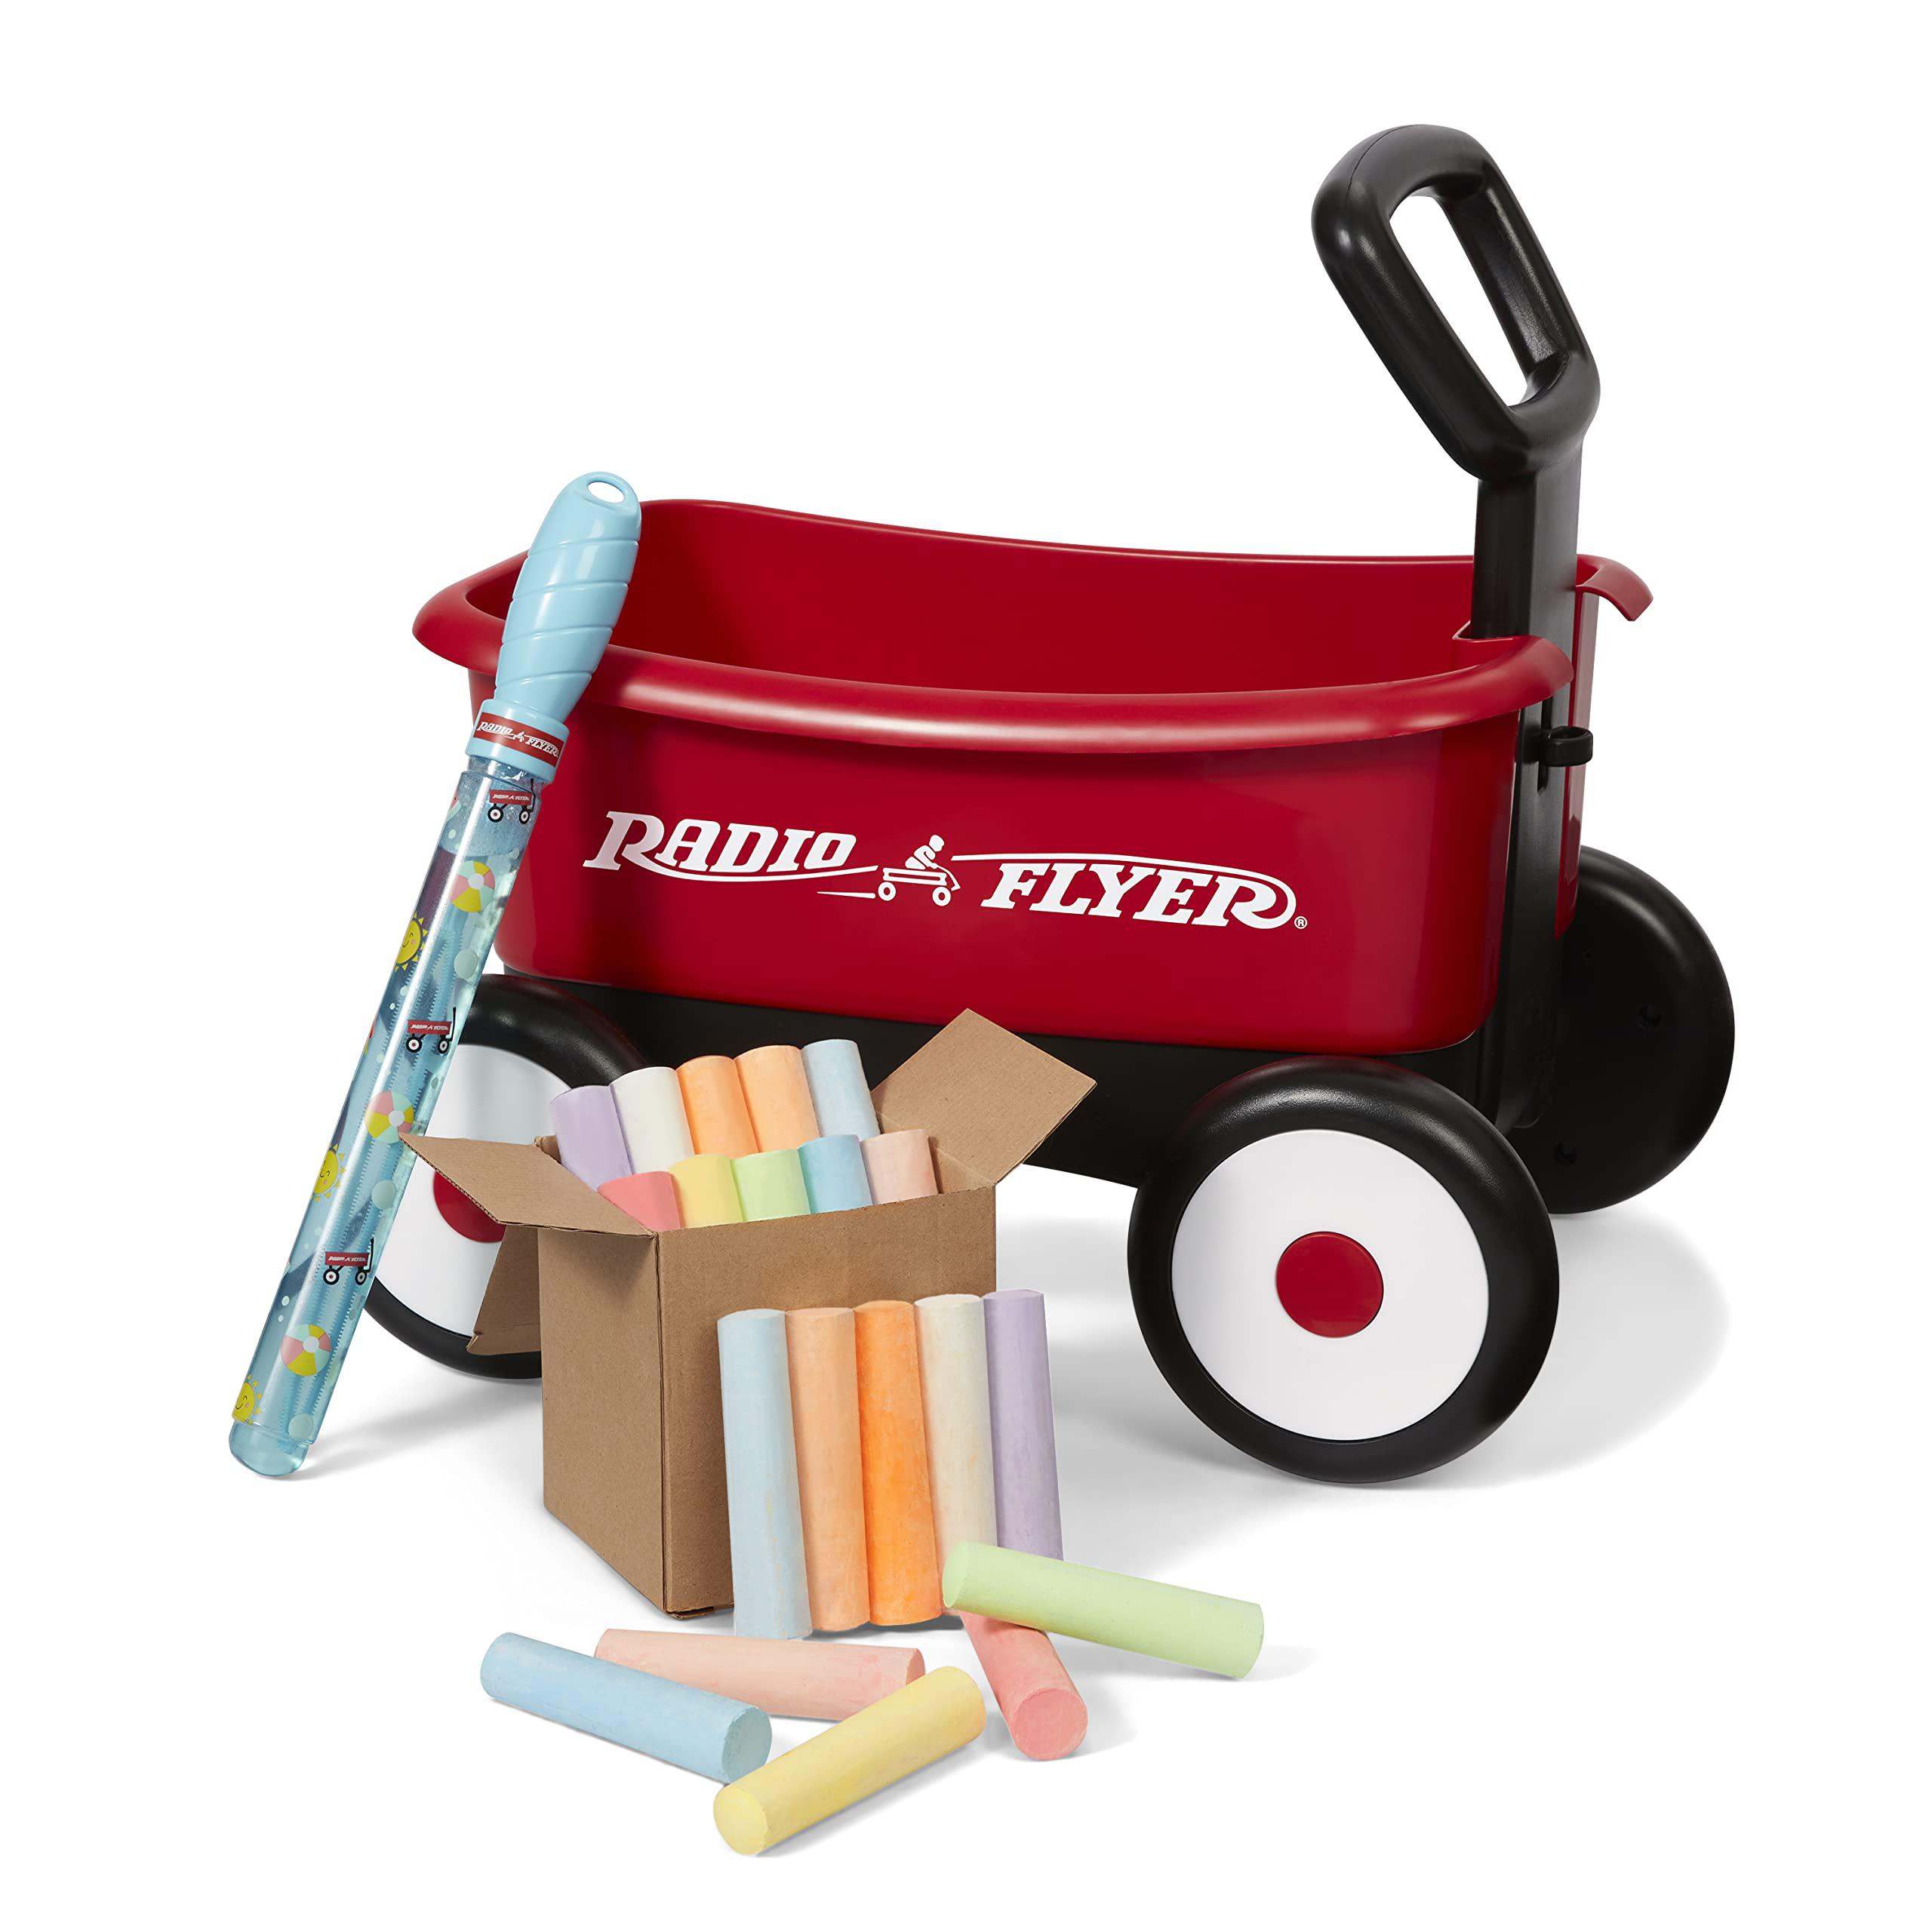 radio flyer summertime fun my 1st wagon with bubbles and chalk ages 3+, red